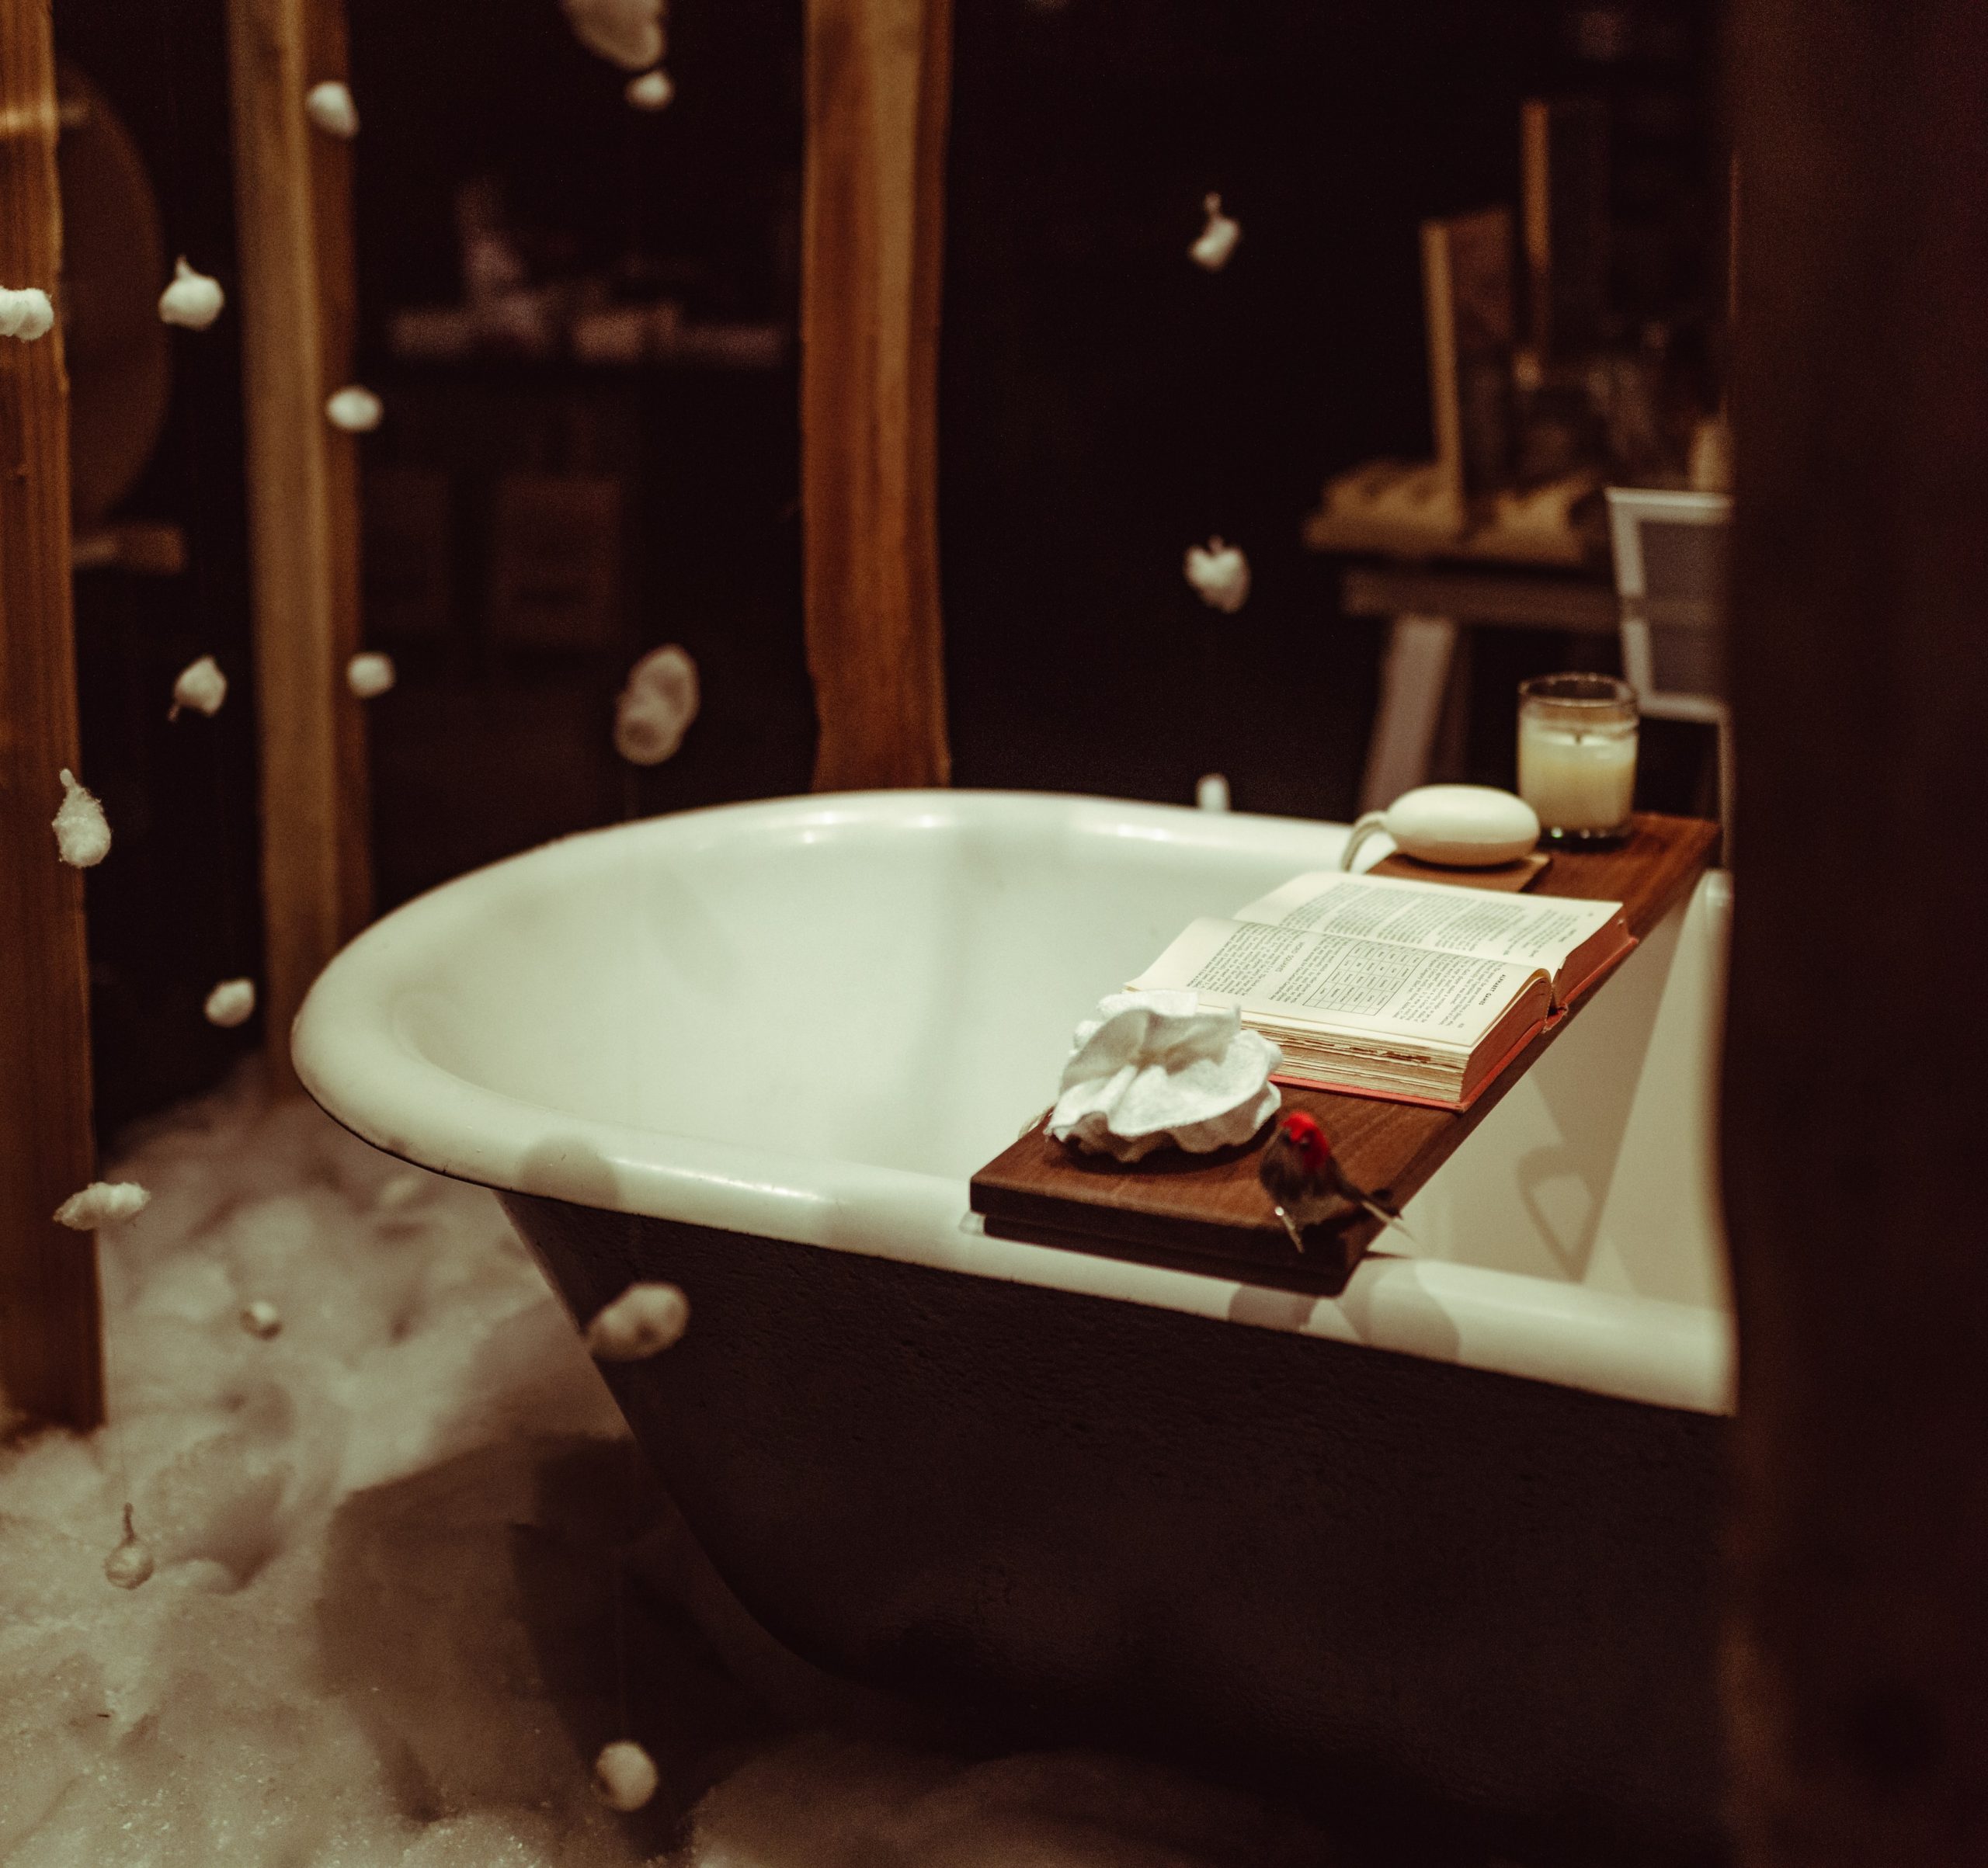 Cure for the COVID blues: A relaxing bath tub set up with a book